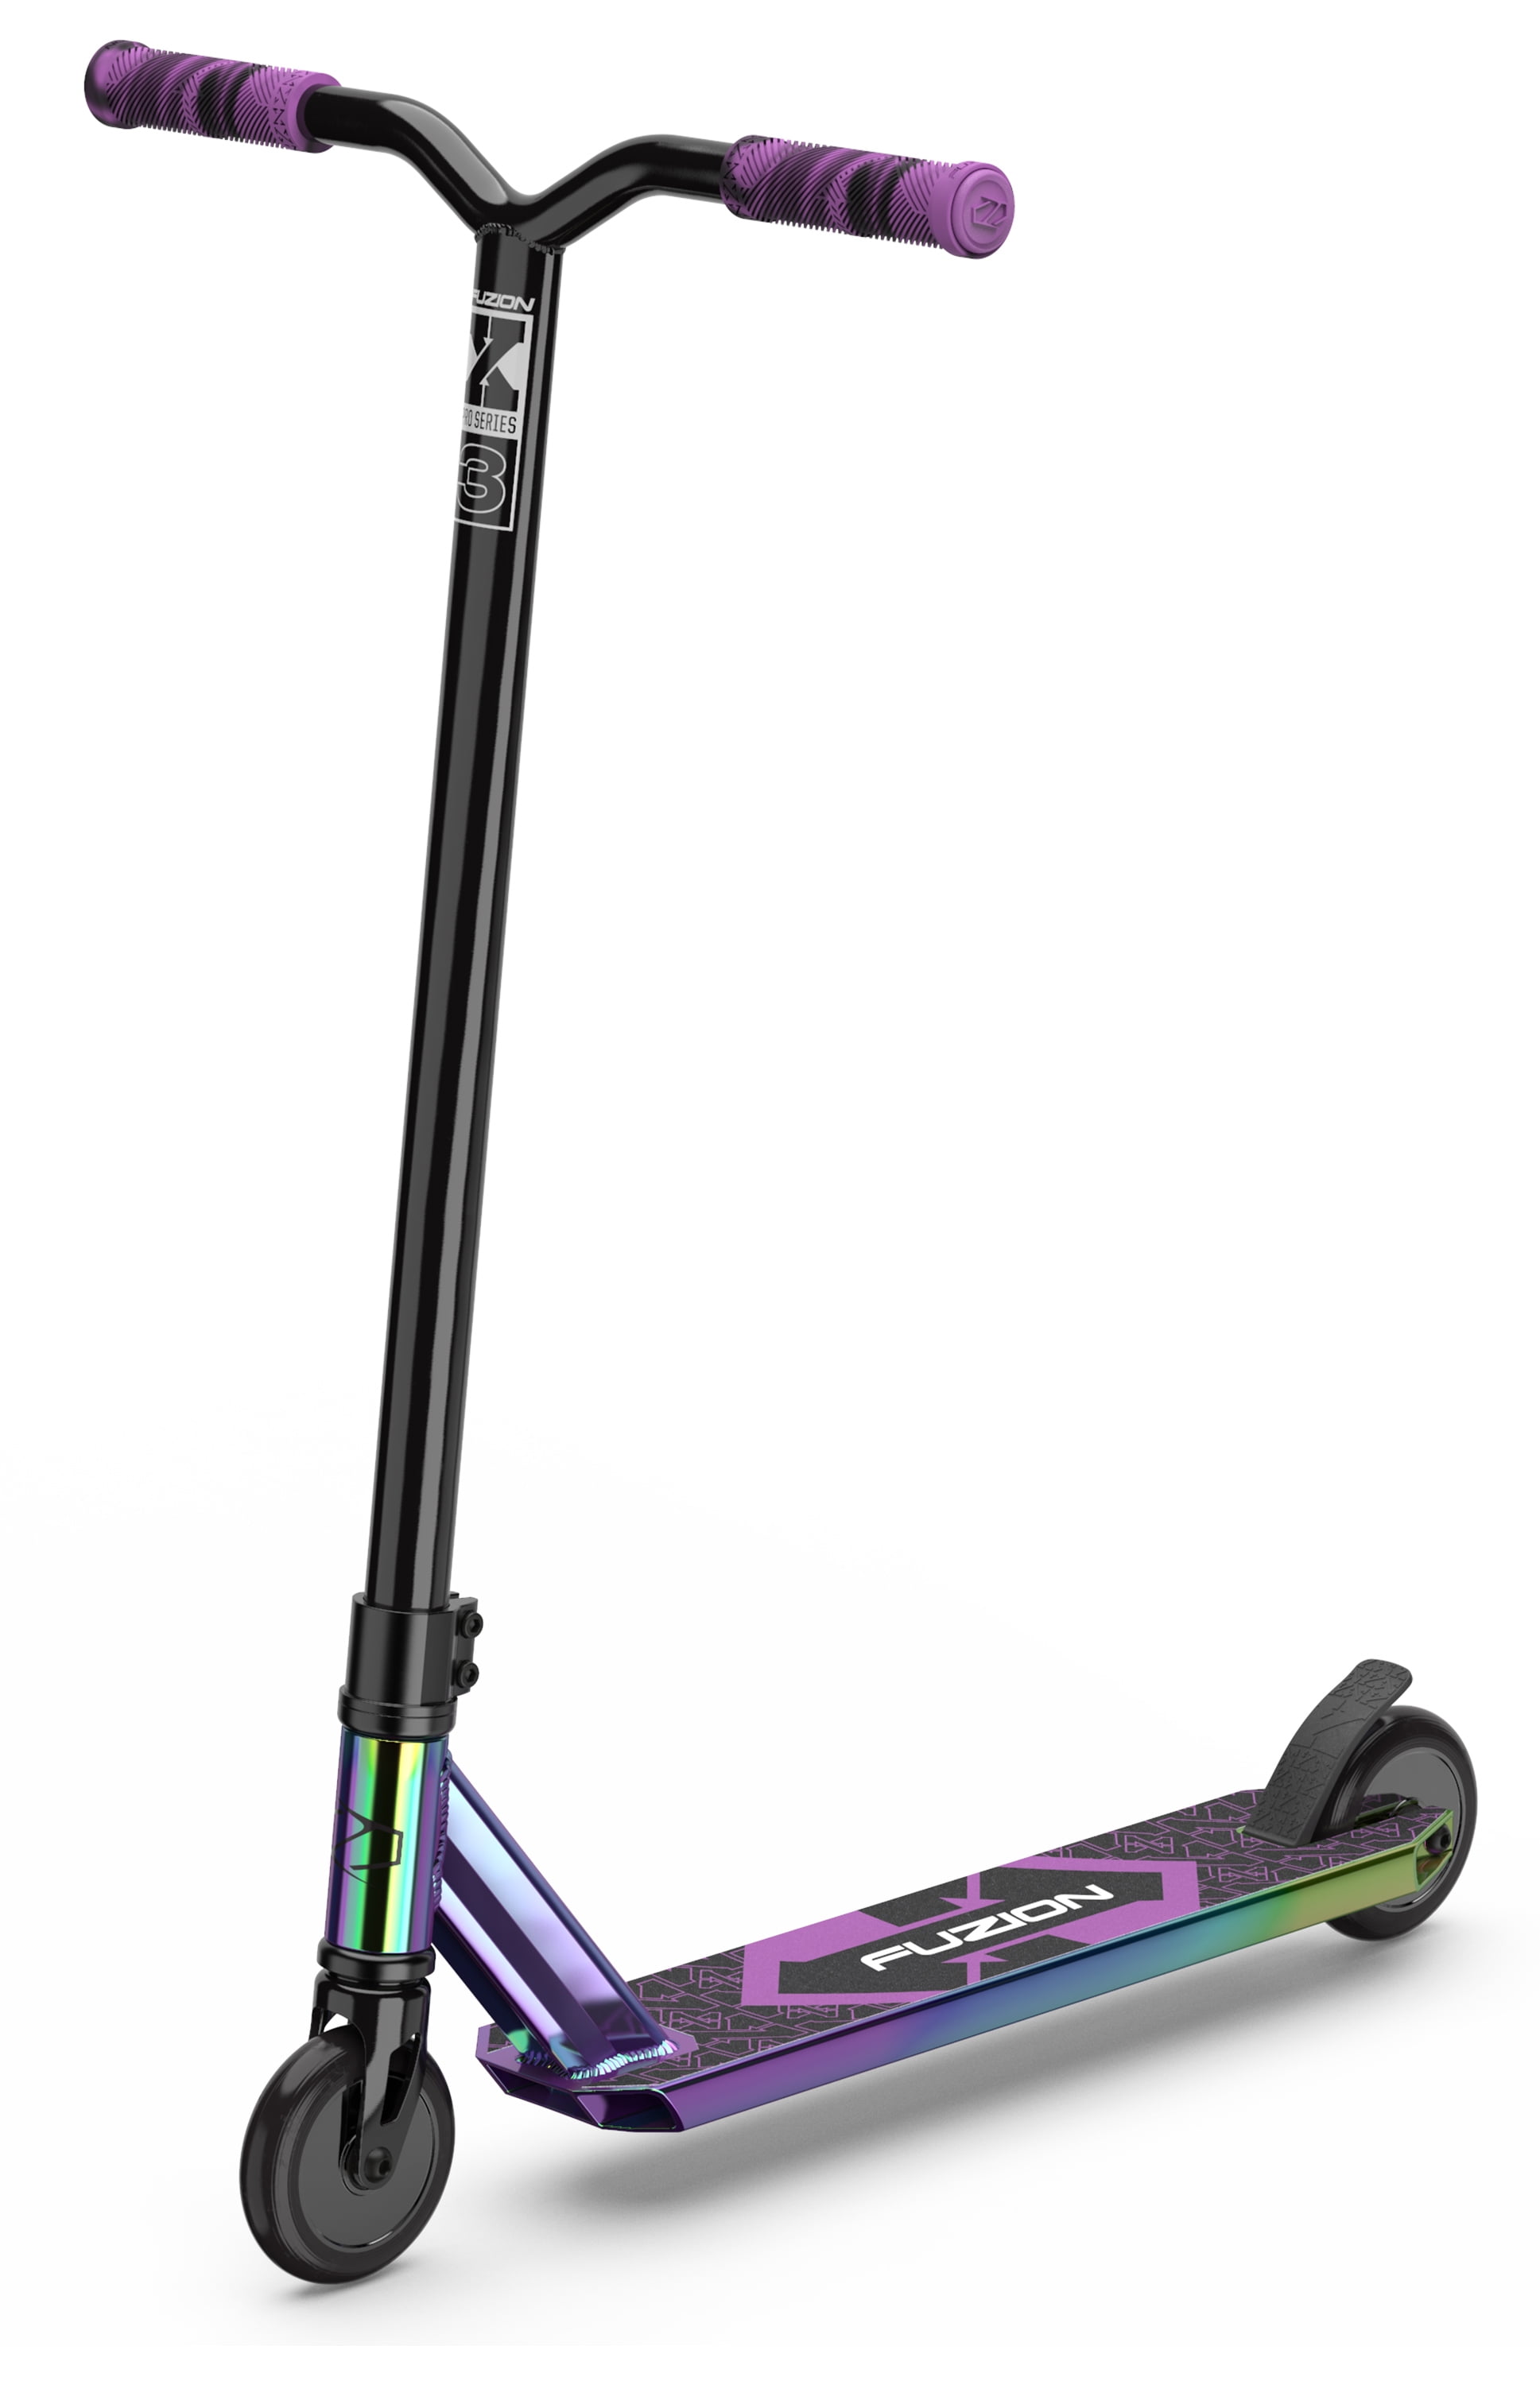 Fuzion Pro X-3 Pro Scooter - Trick Scooter - Beginner Stunt Scooters for  Kids 8 Years and Up – Quality Freestyle Kick Scooter for Boys and Girls